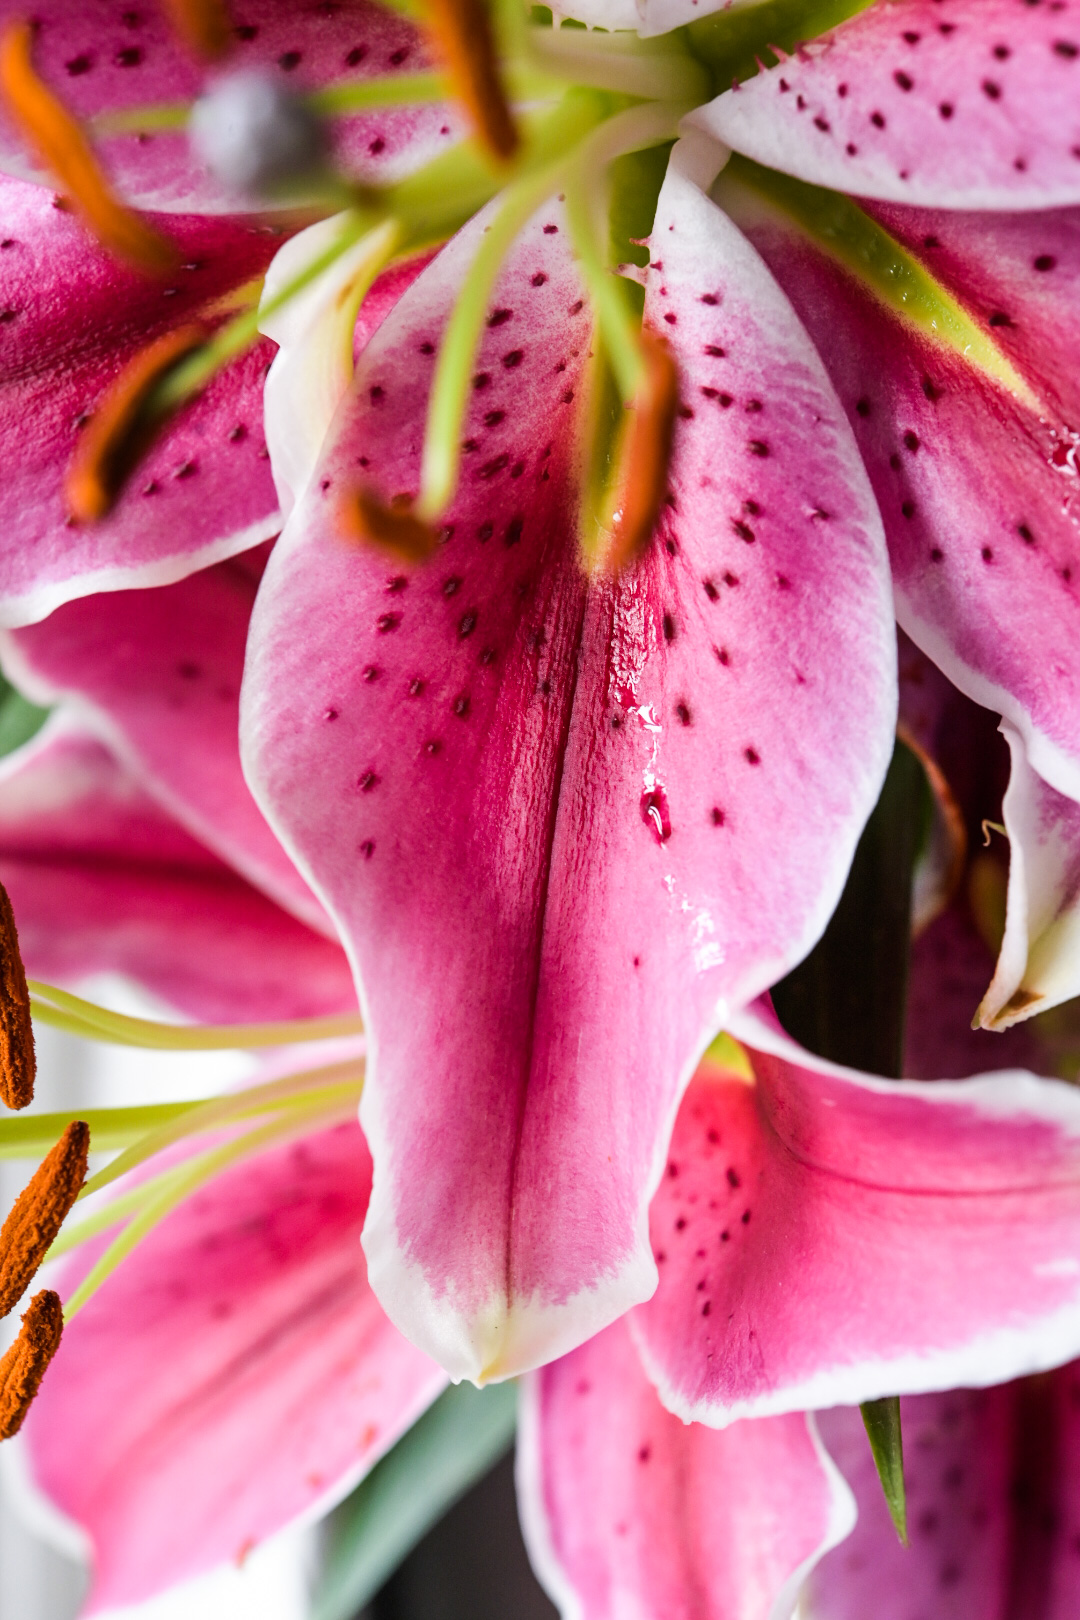 Sap from the pistil of a lily runs down a pollen-stained pedal